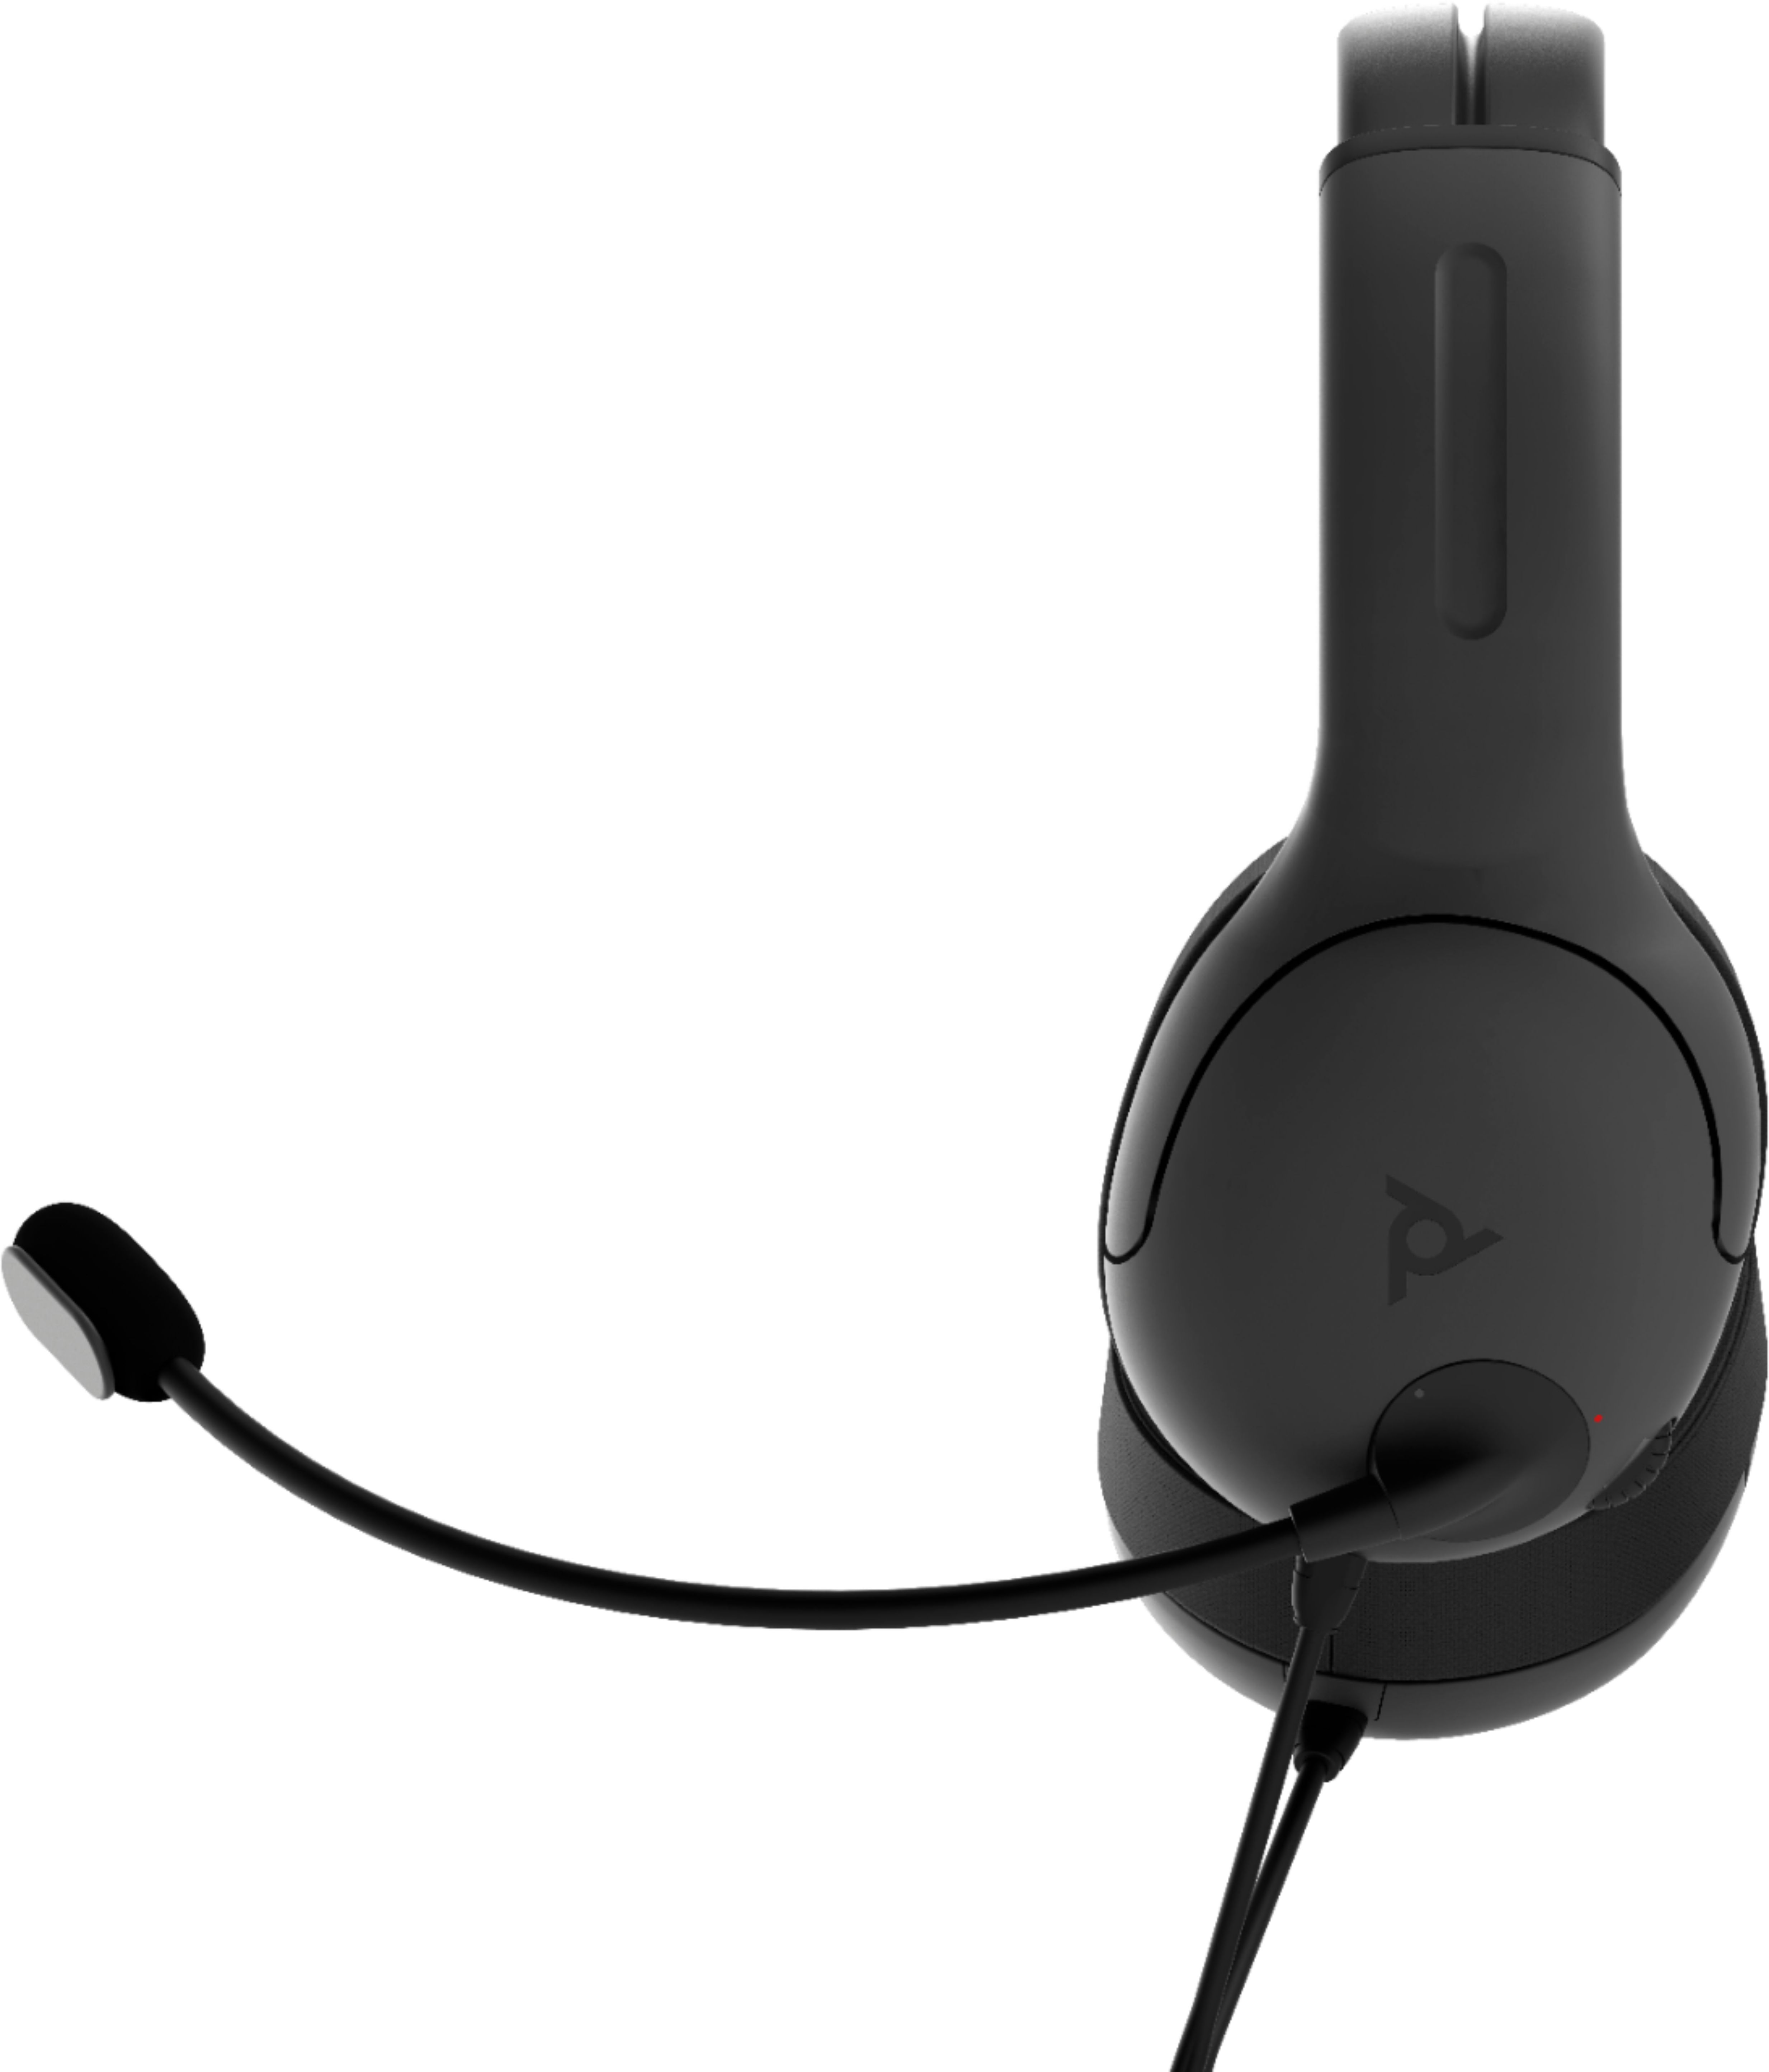 lvl40 wired stereo headset xbox one